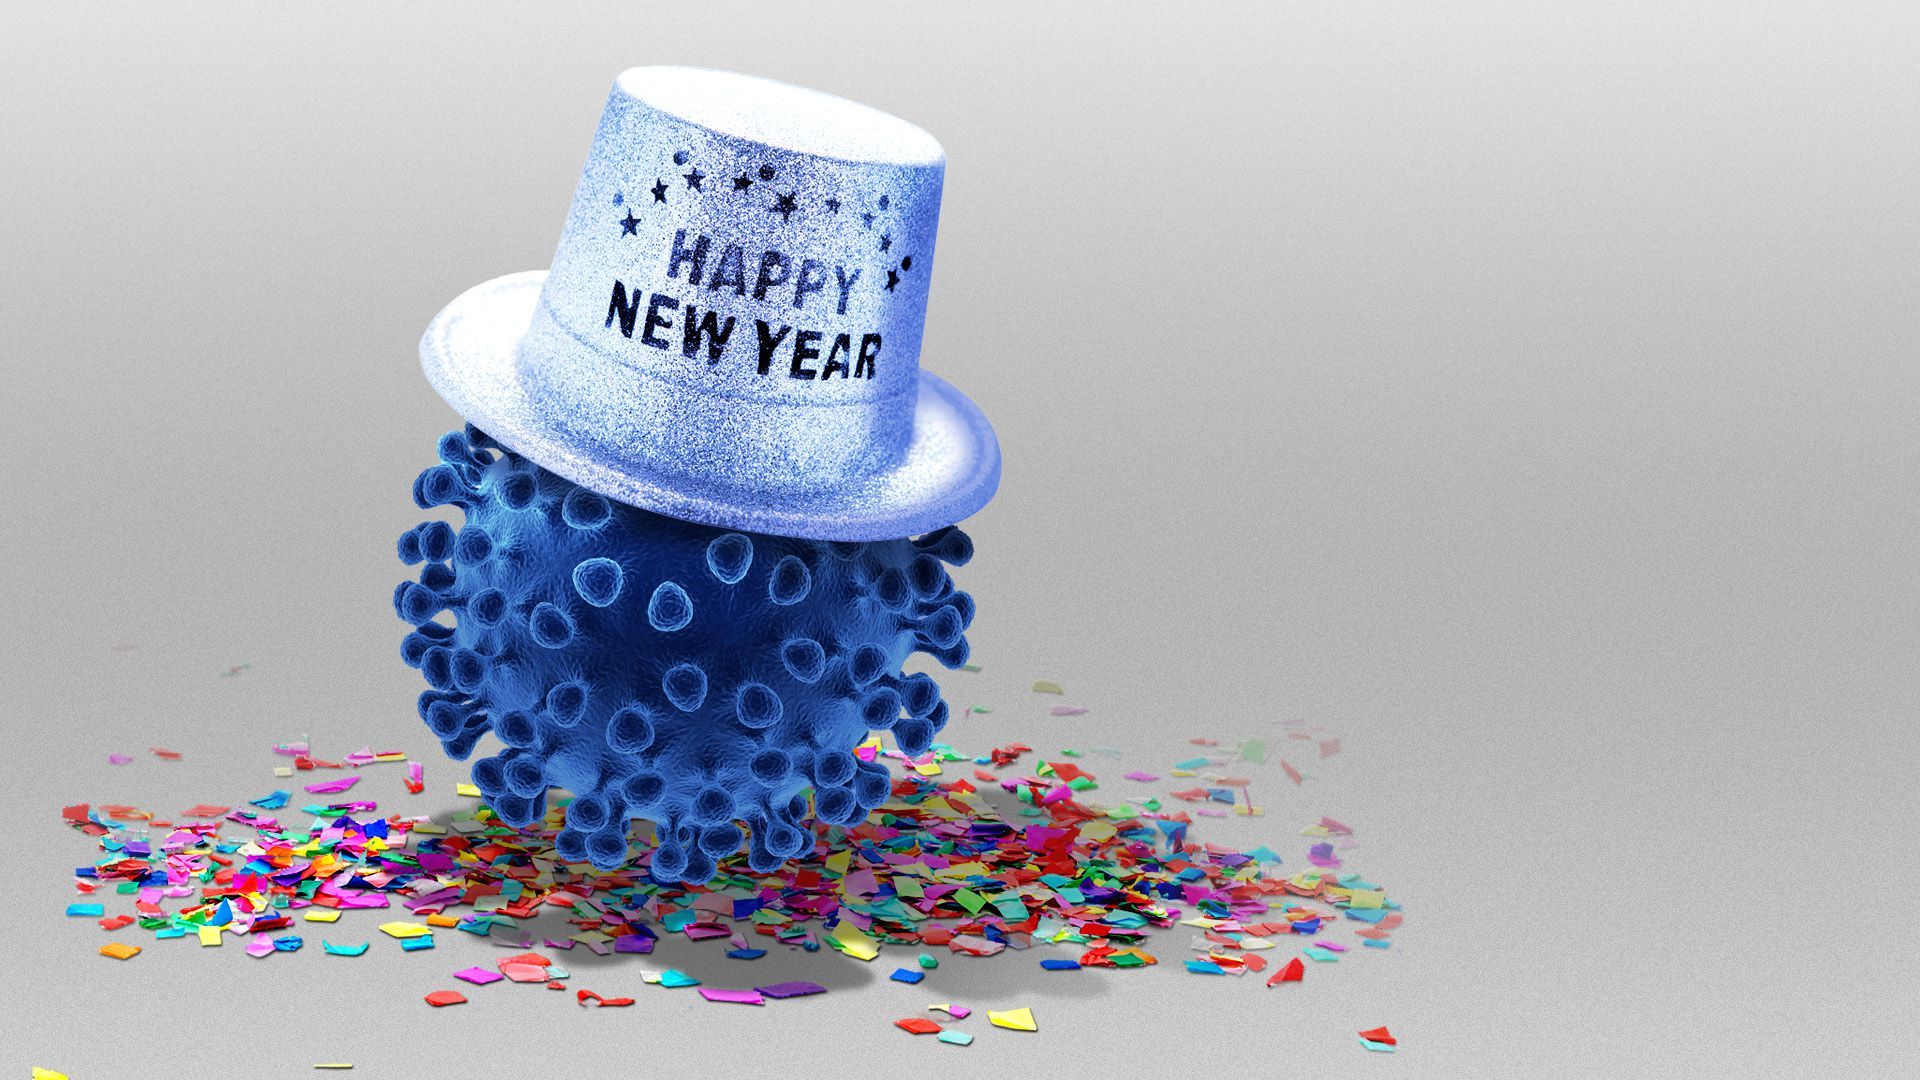 Blue COVID cell sitting on confetti and wearing a Happy New Year hat.